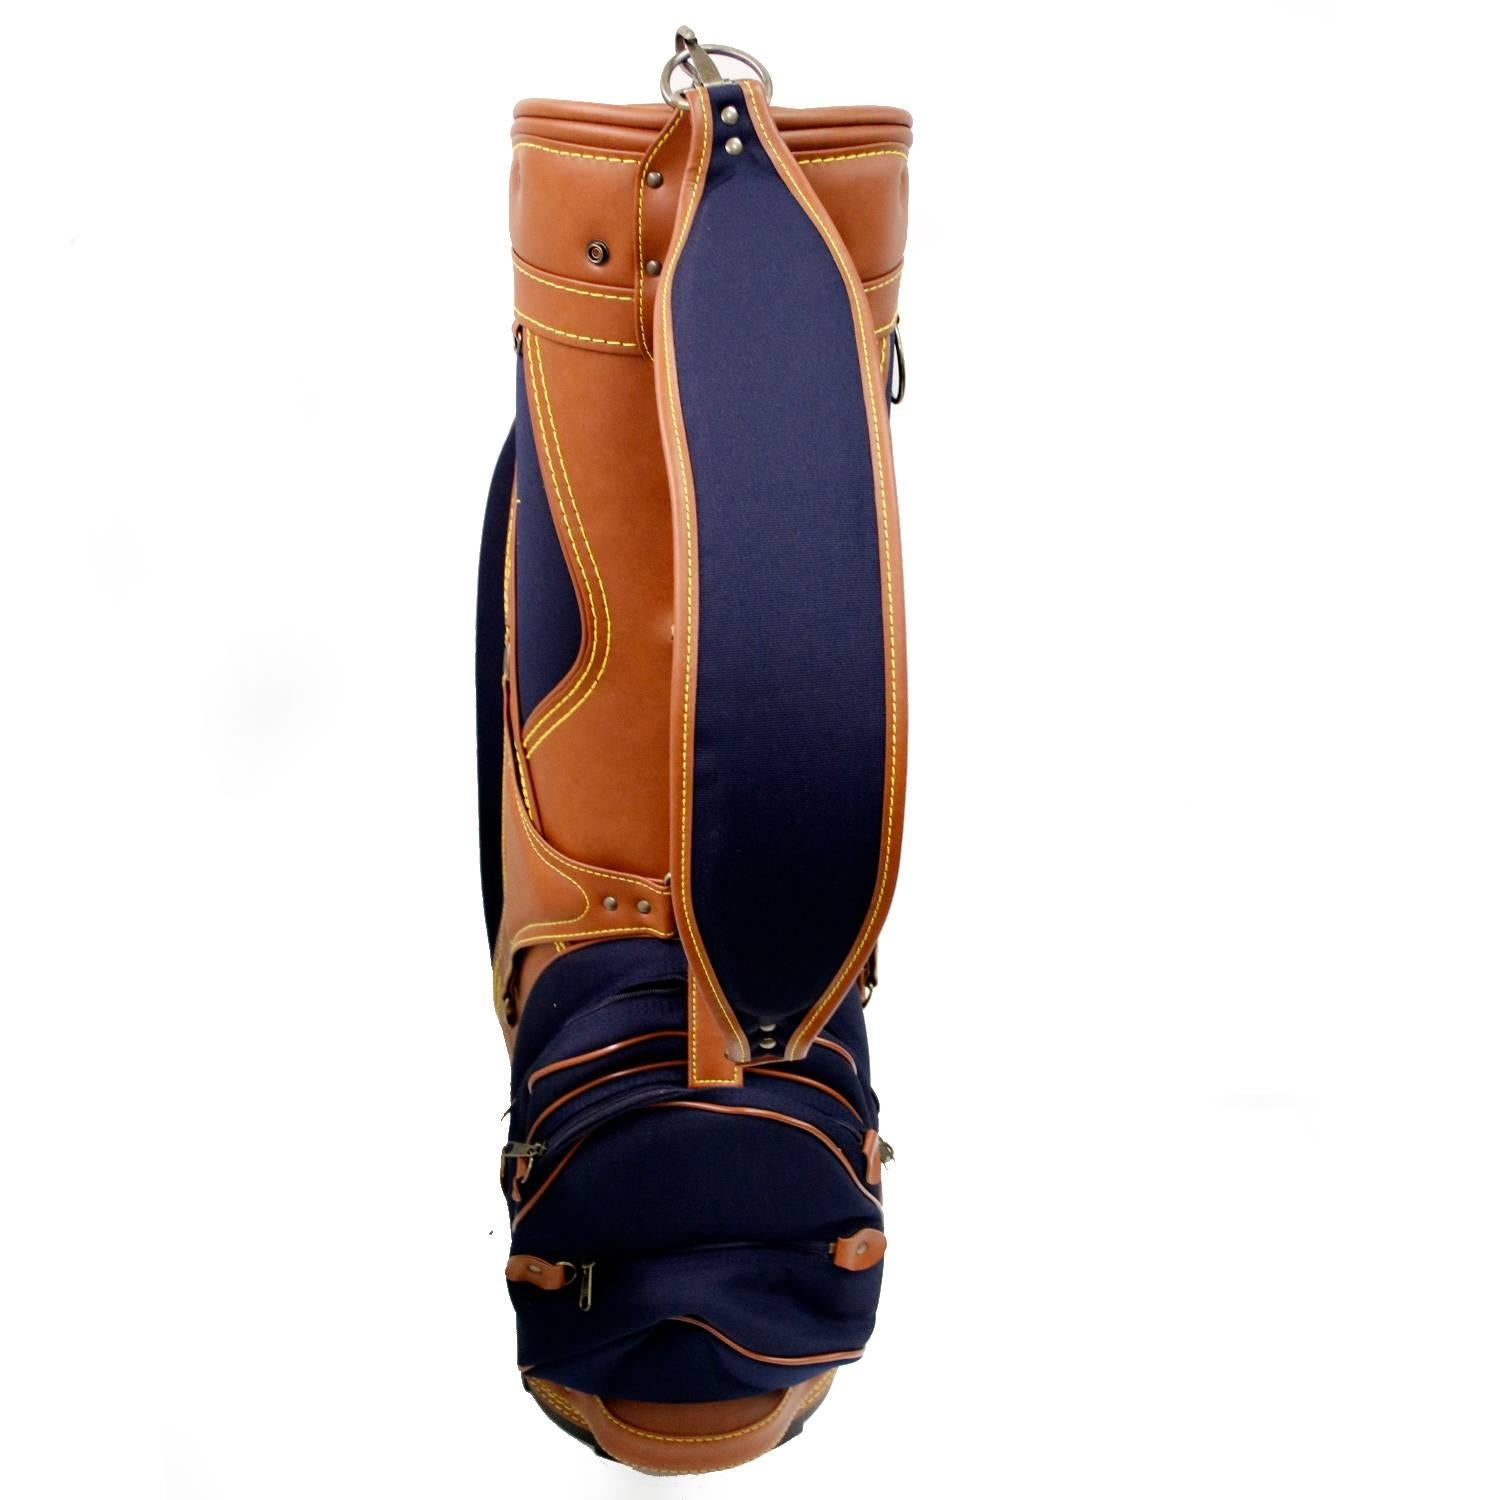 Patek Philippe & Co. Golf Bag - . Original blue and with brown leather accents. Six full -length dividers for organization and separation of clubs. Three pockets for side garments. Top dimensions: 12 x 11 x 35 inches. Total weight 10 lbs.